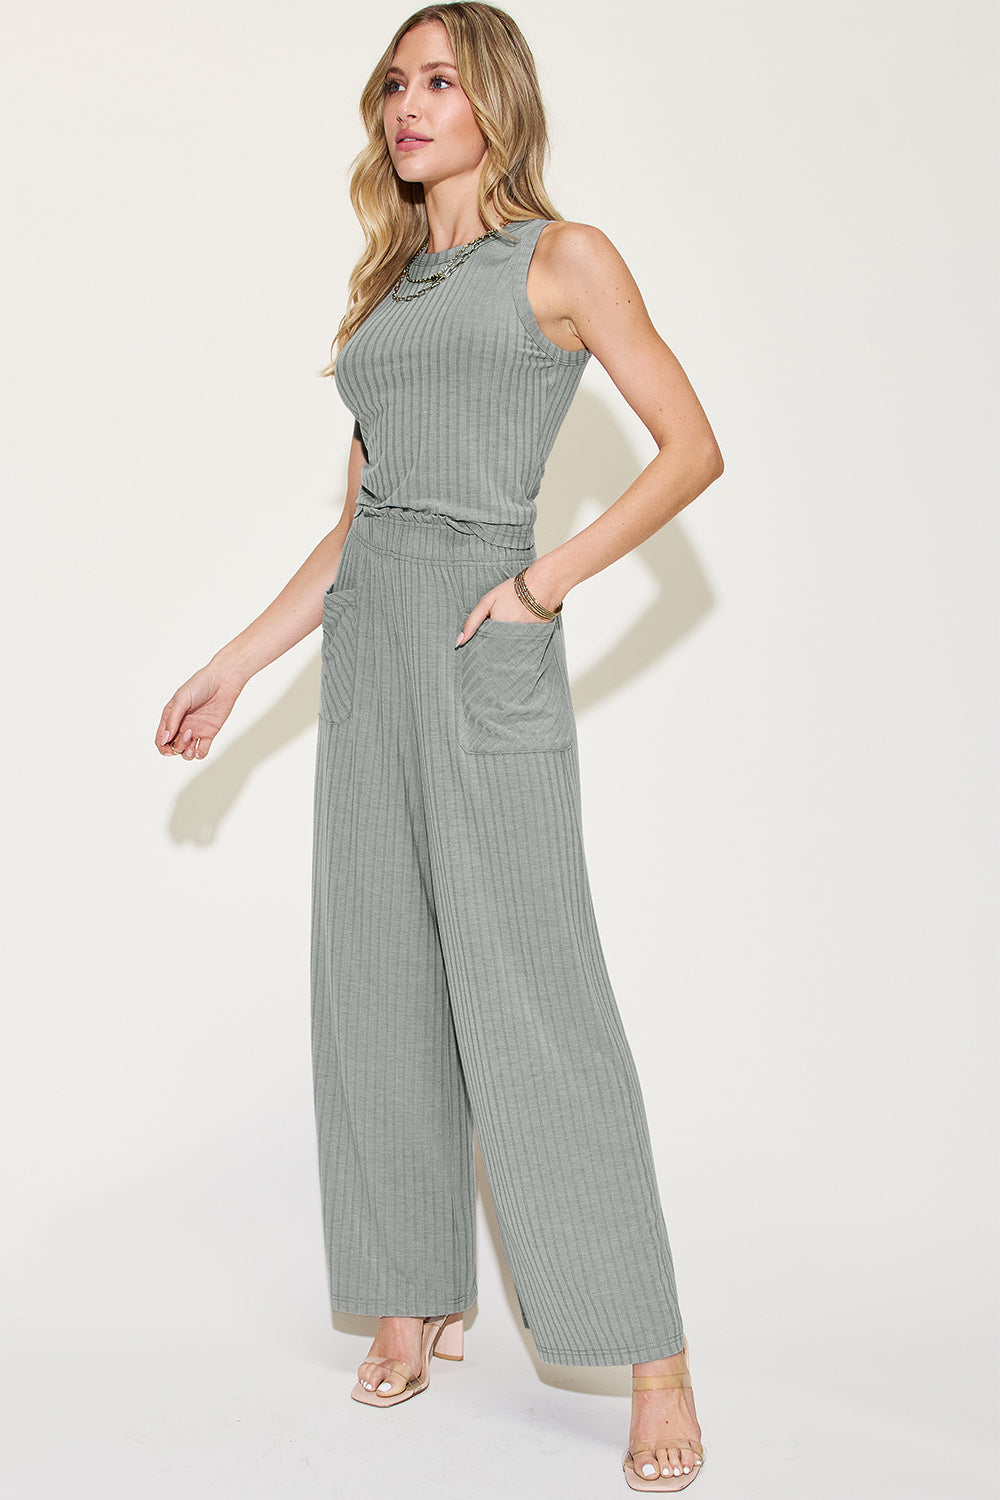 Embrace Effortless Style with the Basic Bae Ribbed Tank and Pants Set